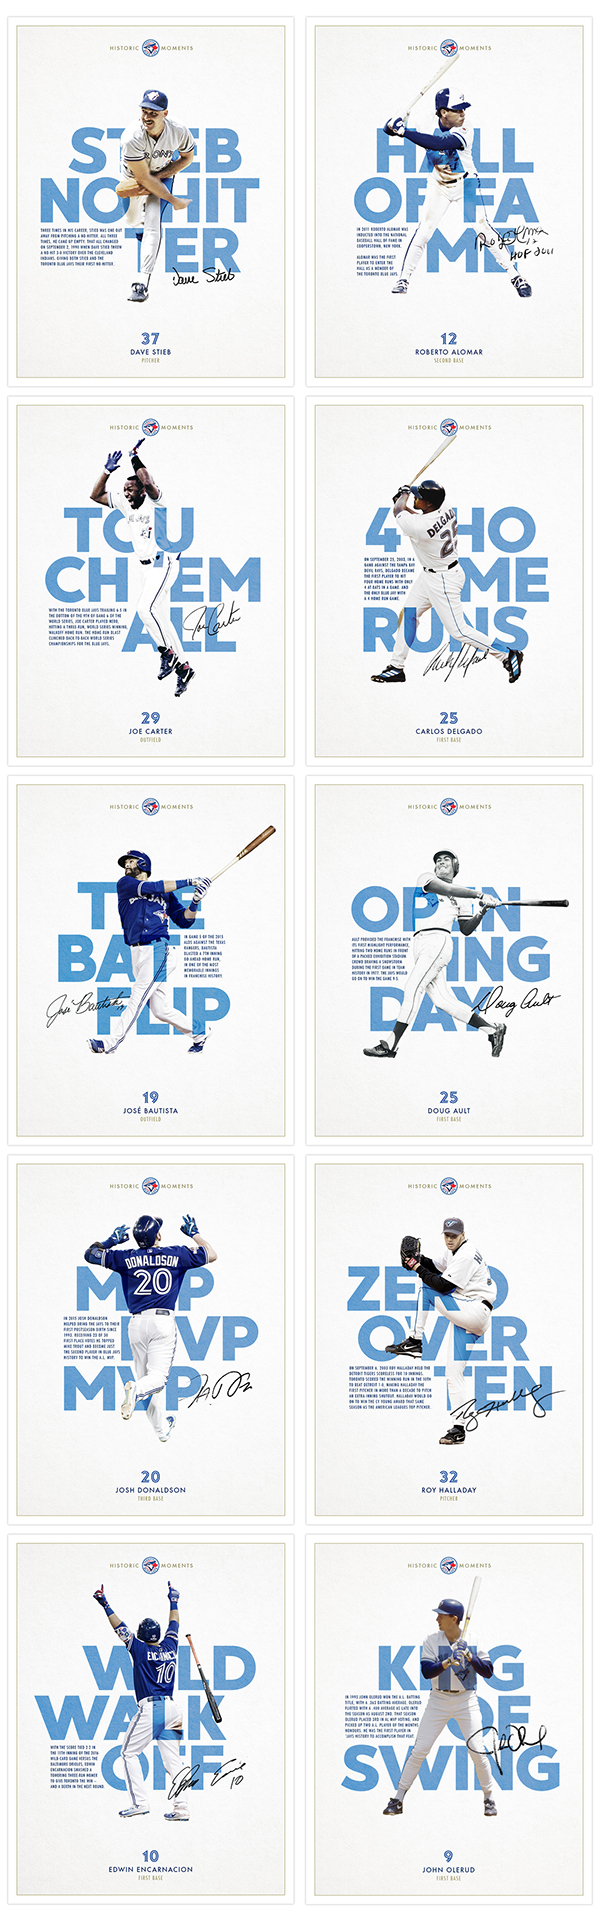 Historic Blue Jays Moments - Poster Series